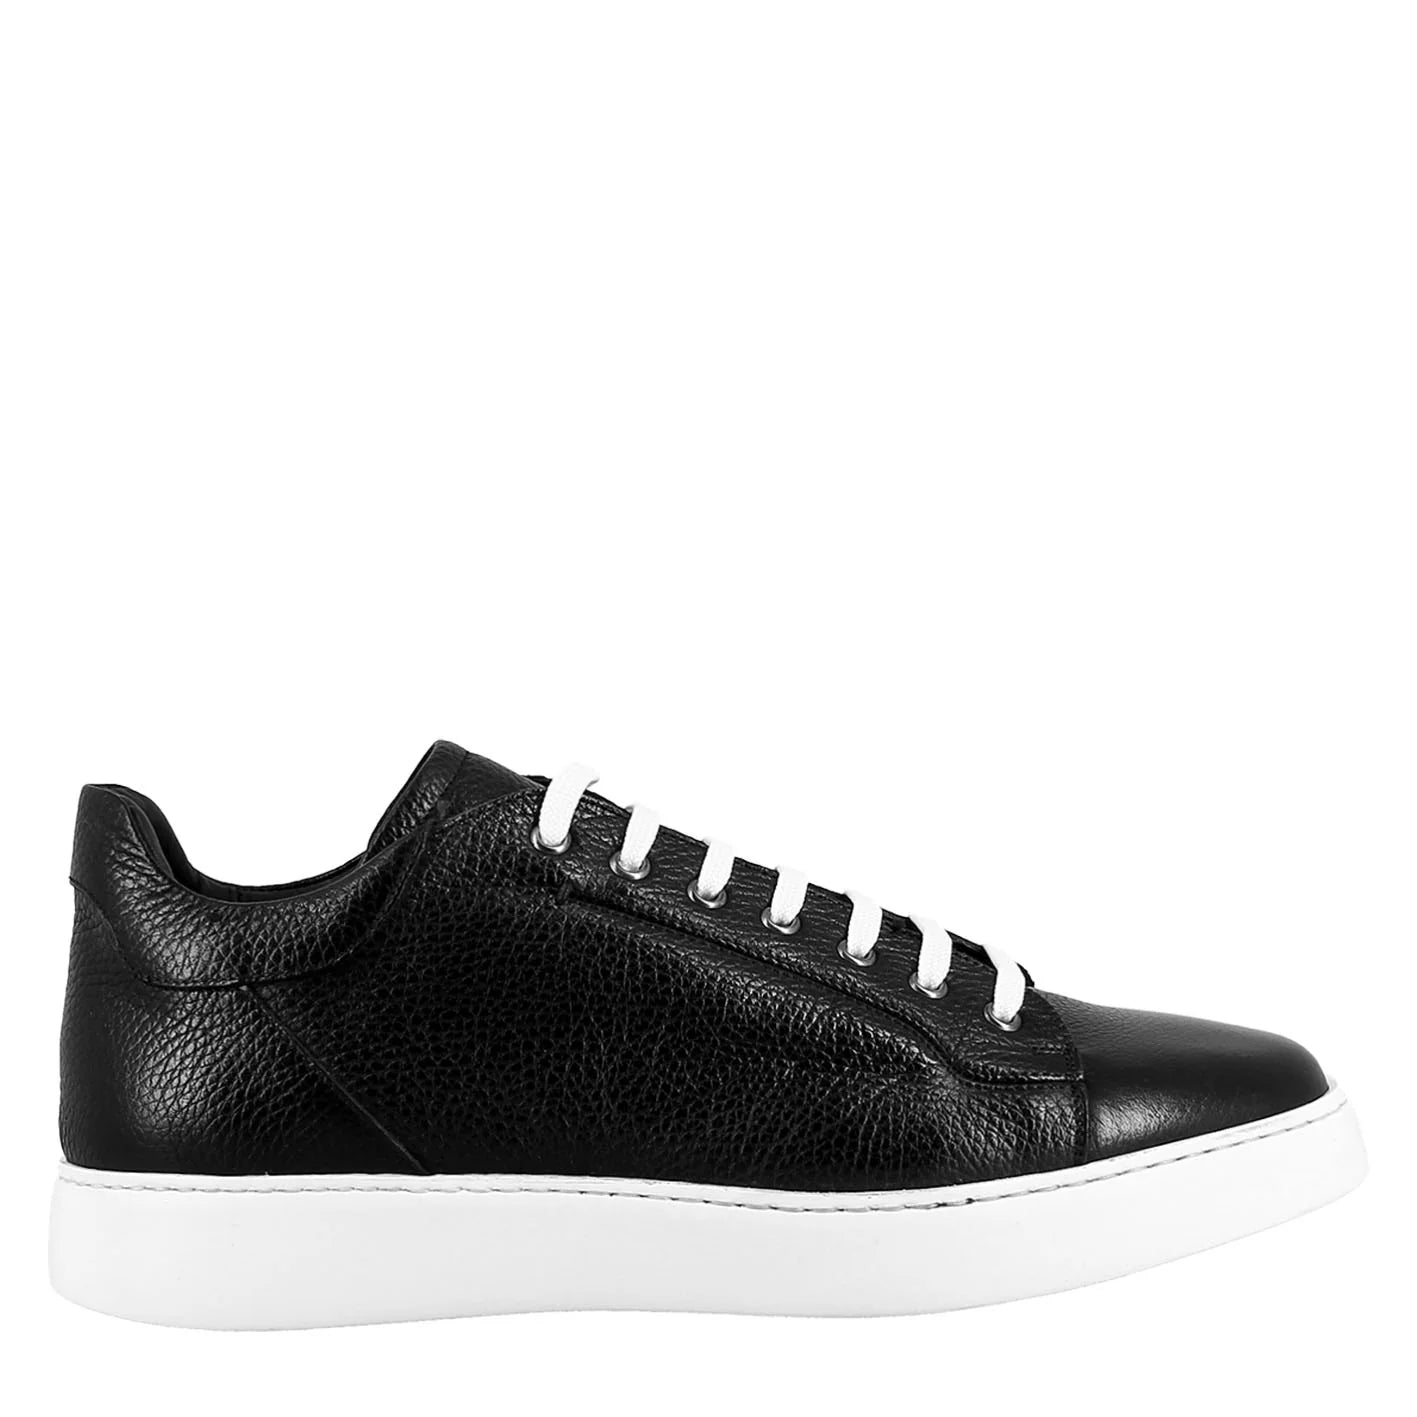 Black sneaker in smooth leather